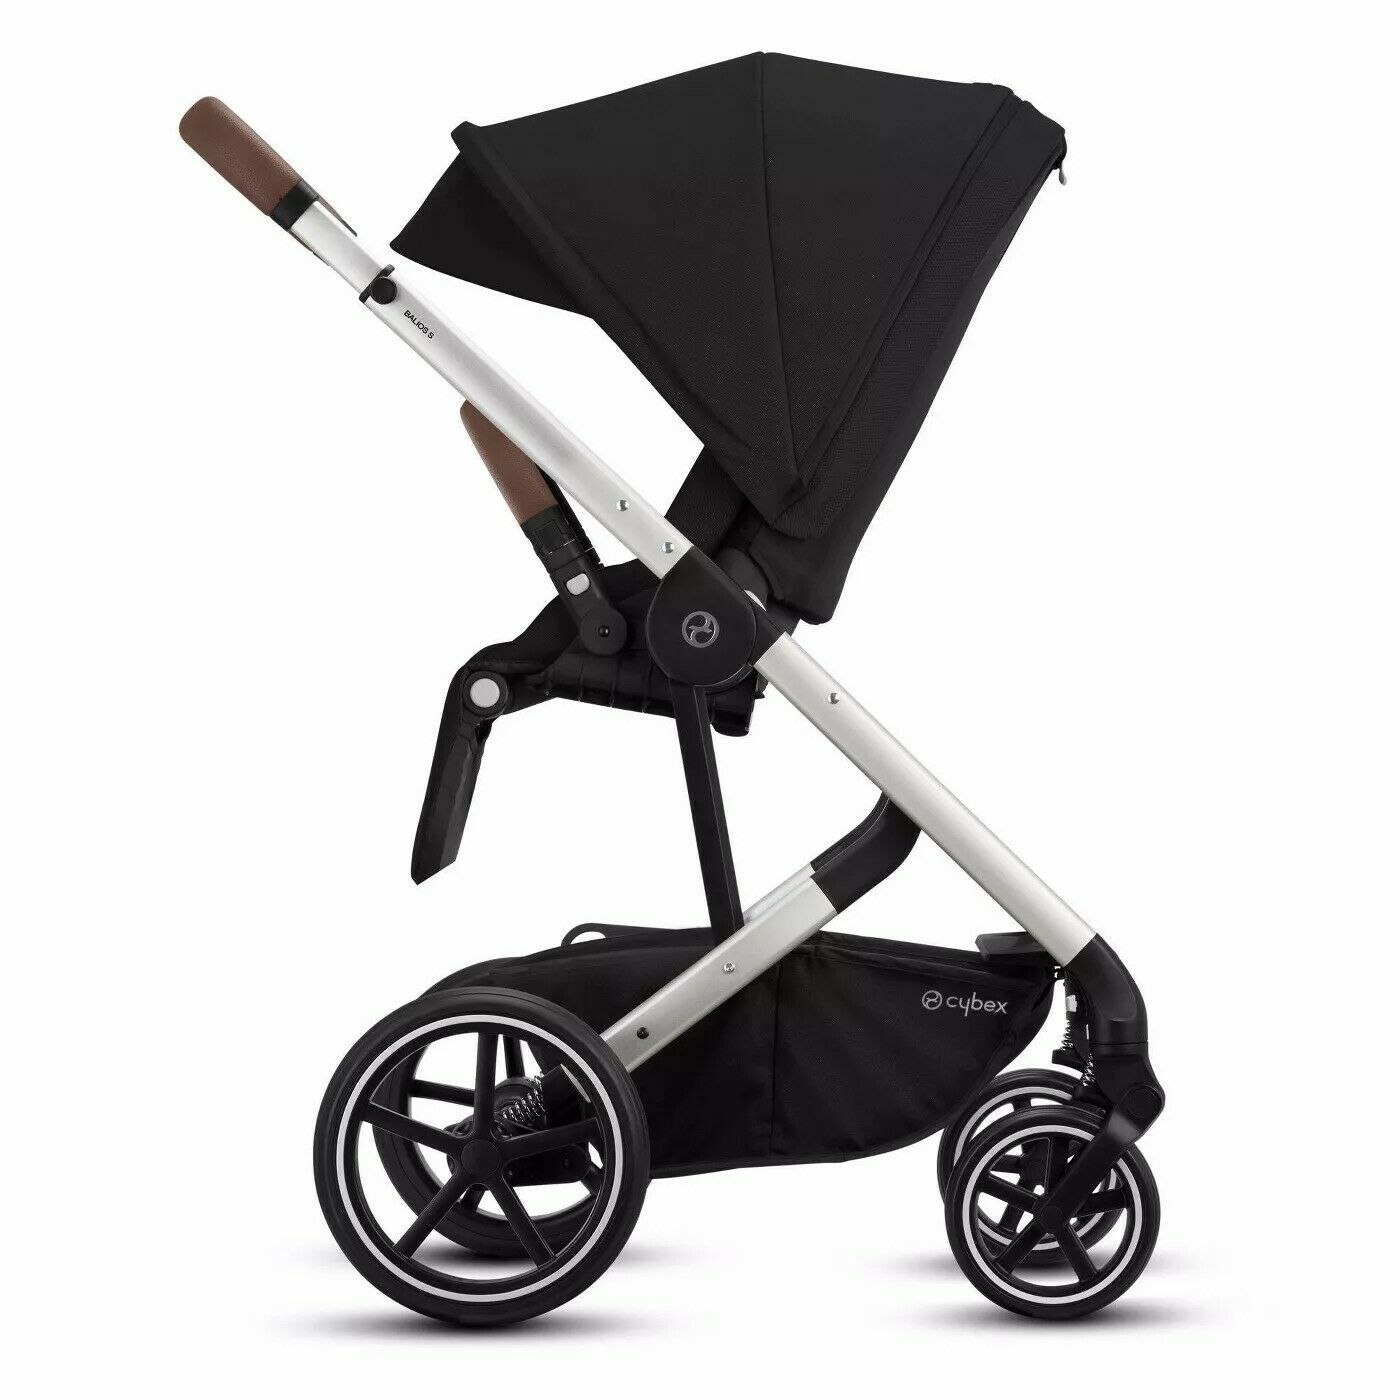 Cybex Balios S Lux3-in-1 Baby Stroller with Car Seat Travel System New